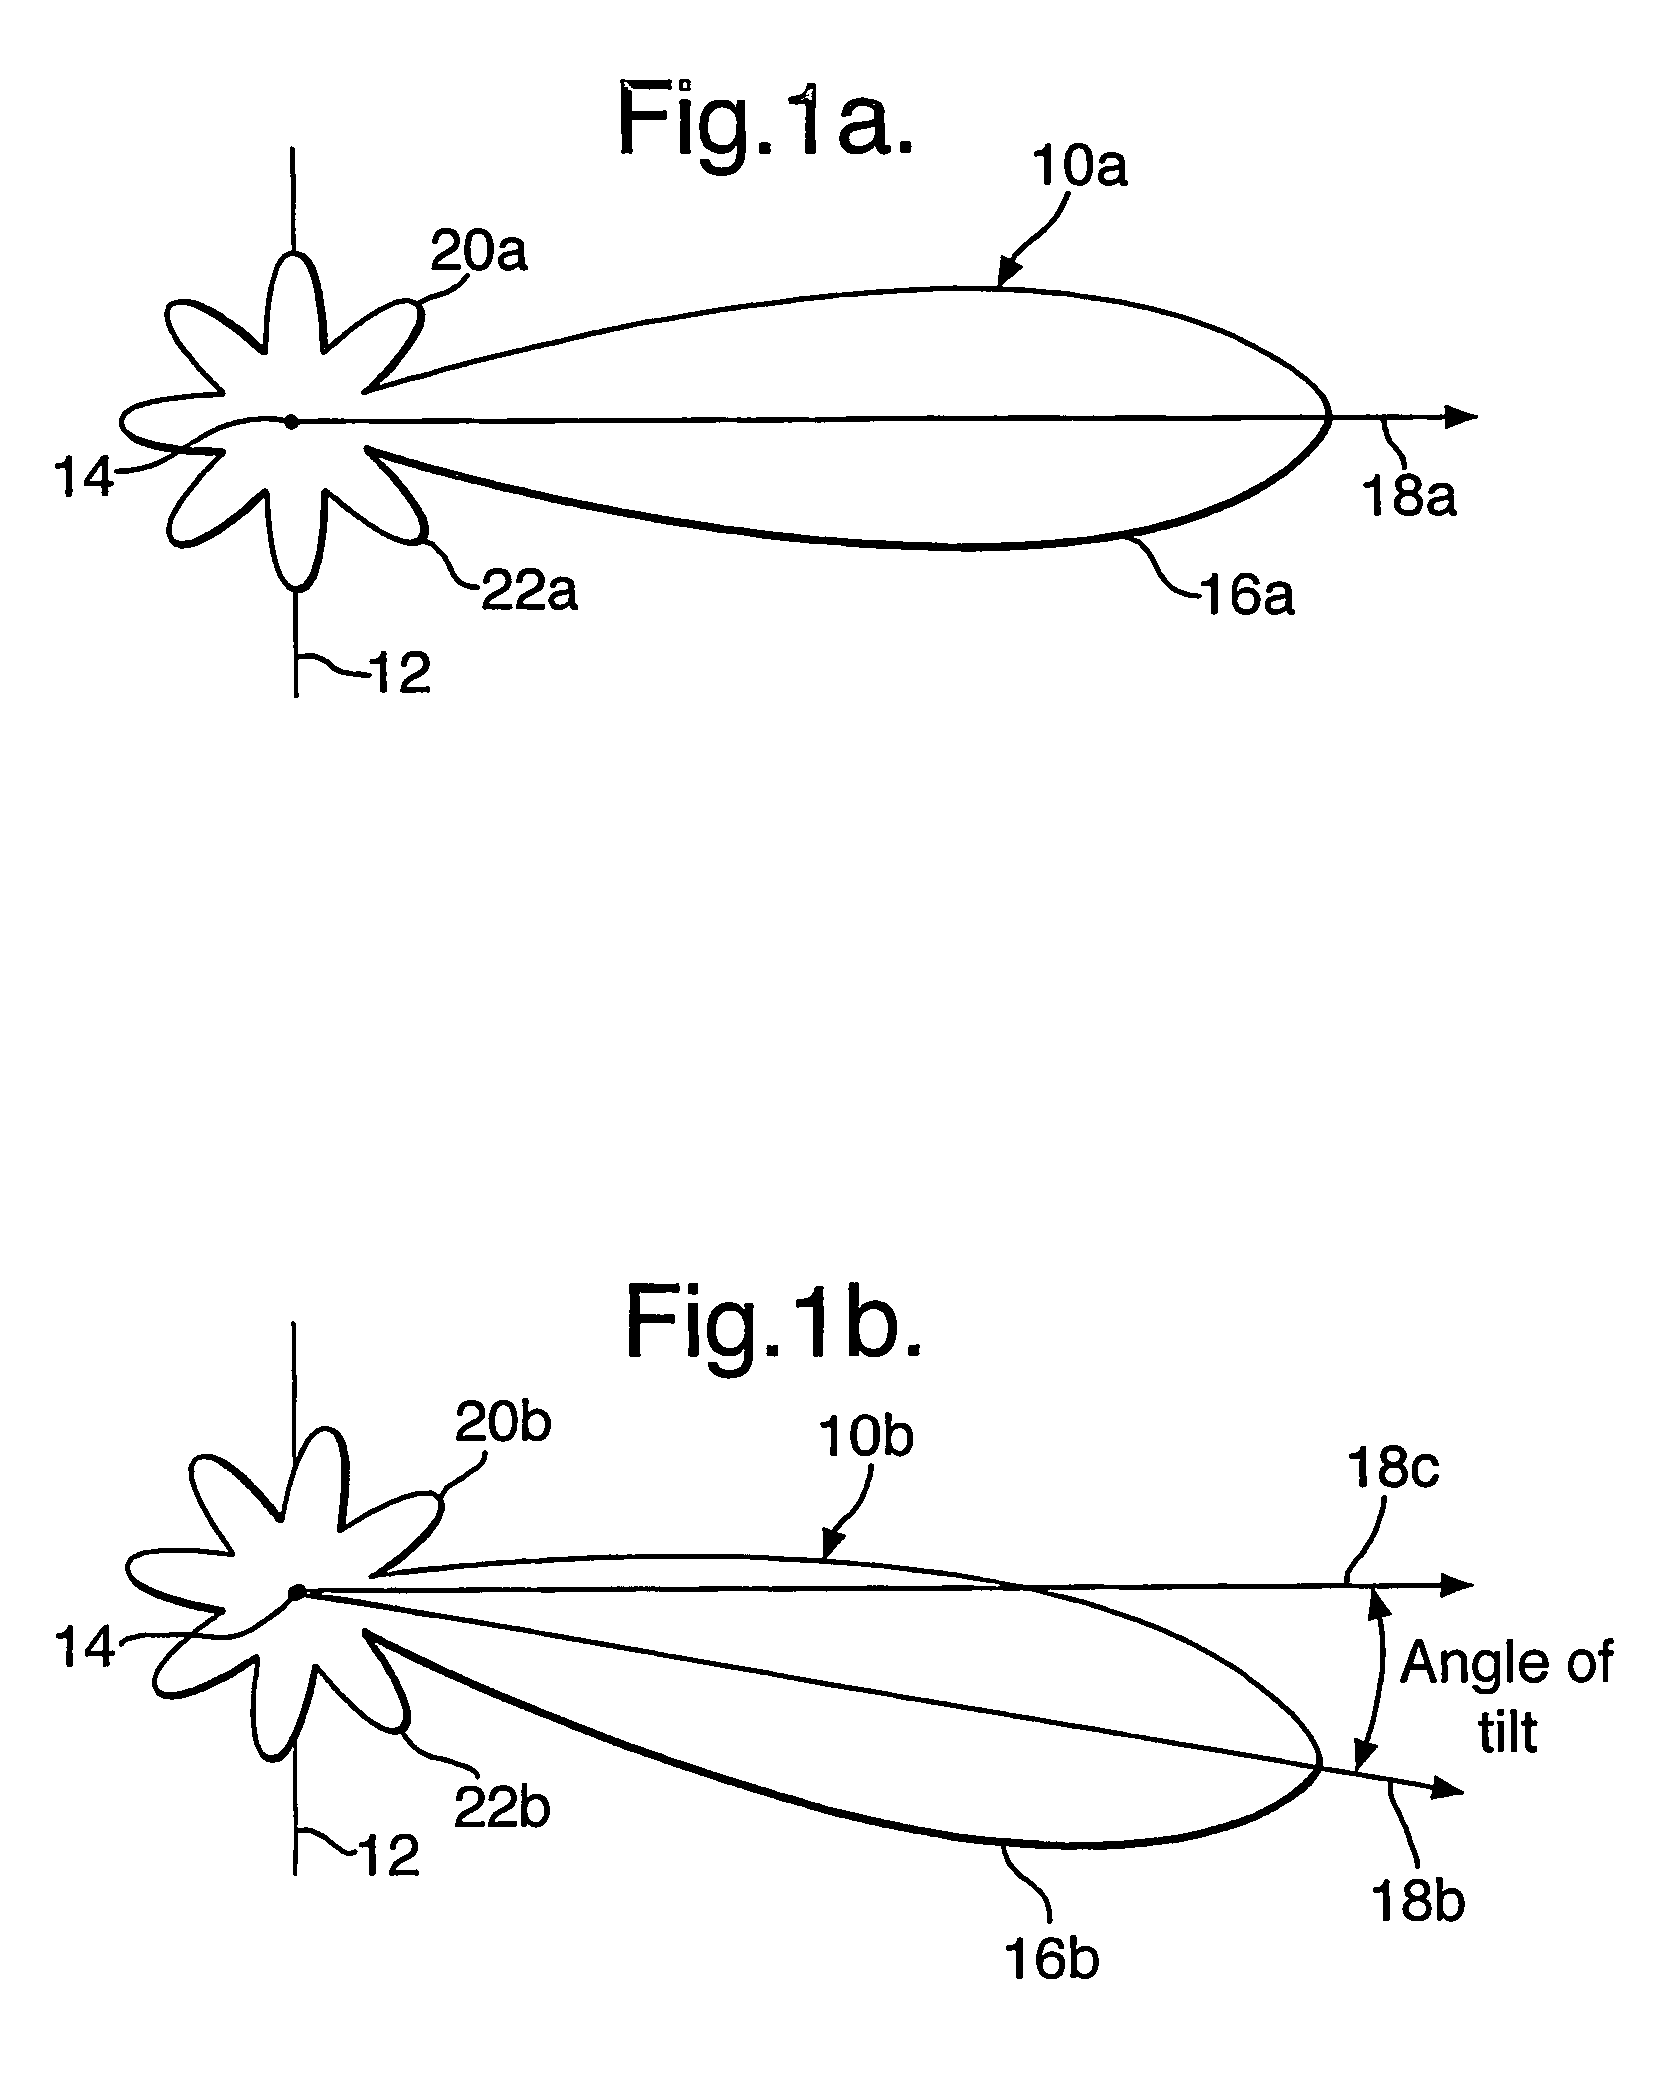 Phased array antenna system with adjustable electrical tilt